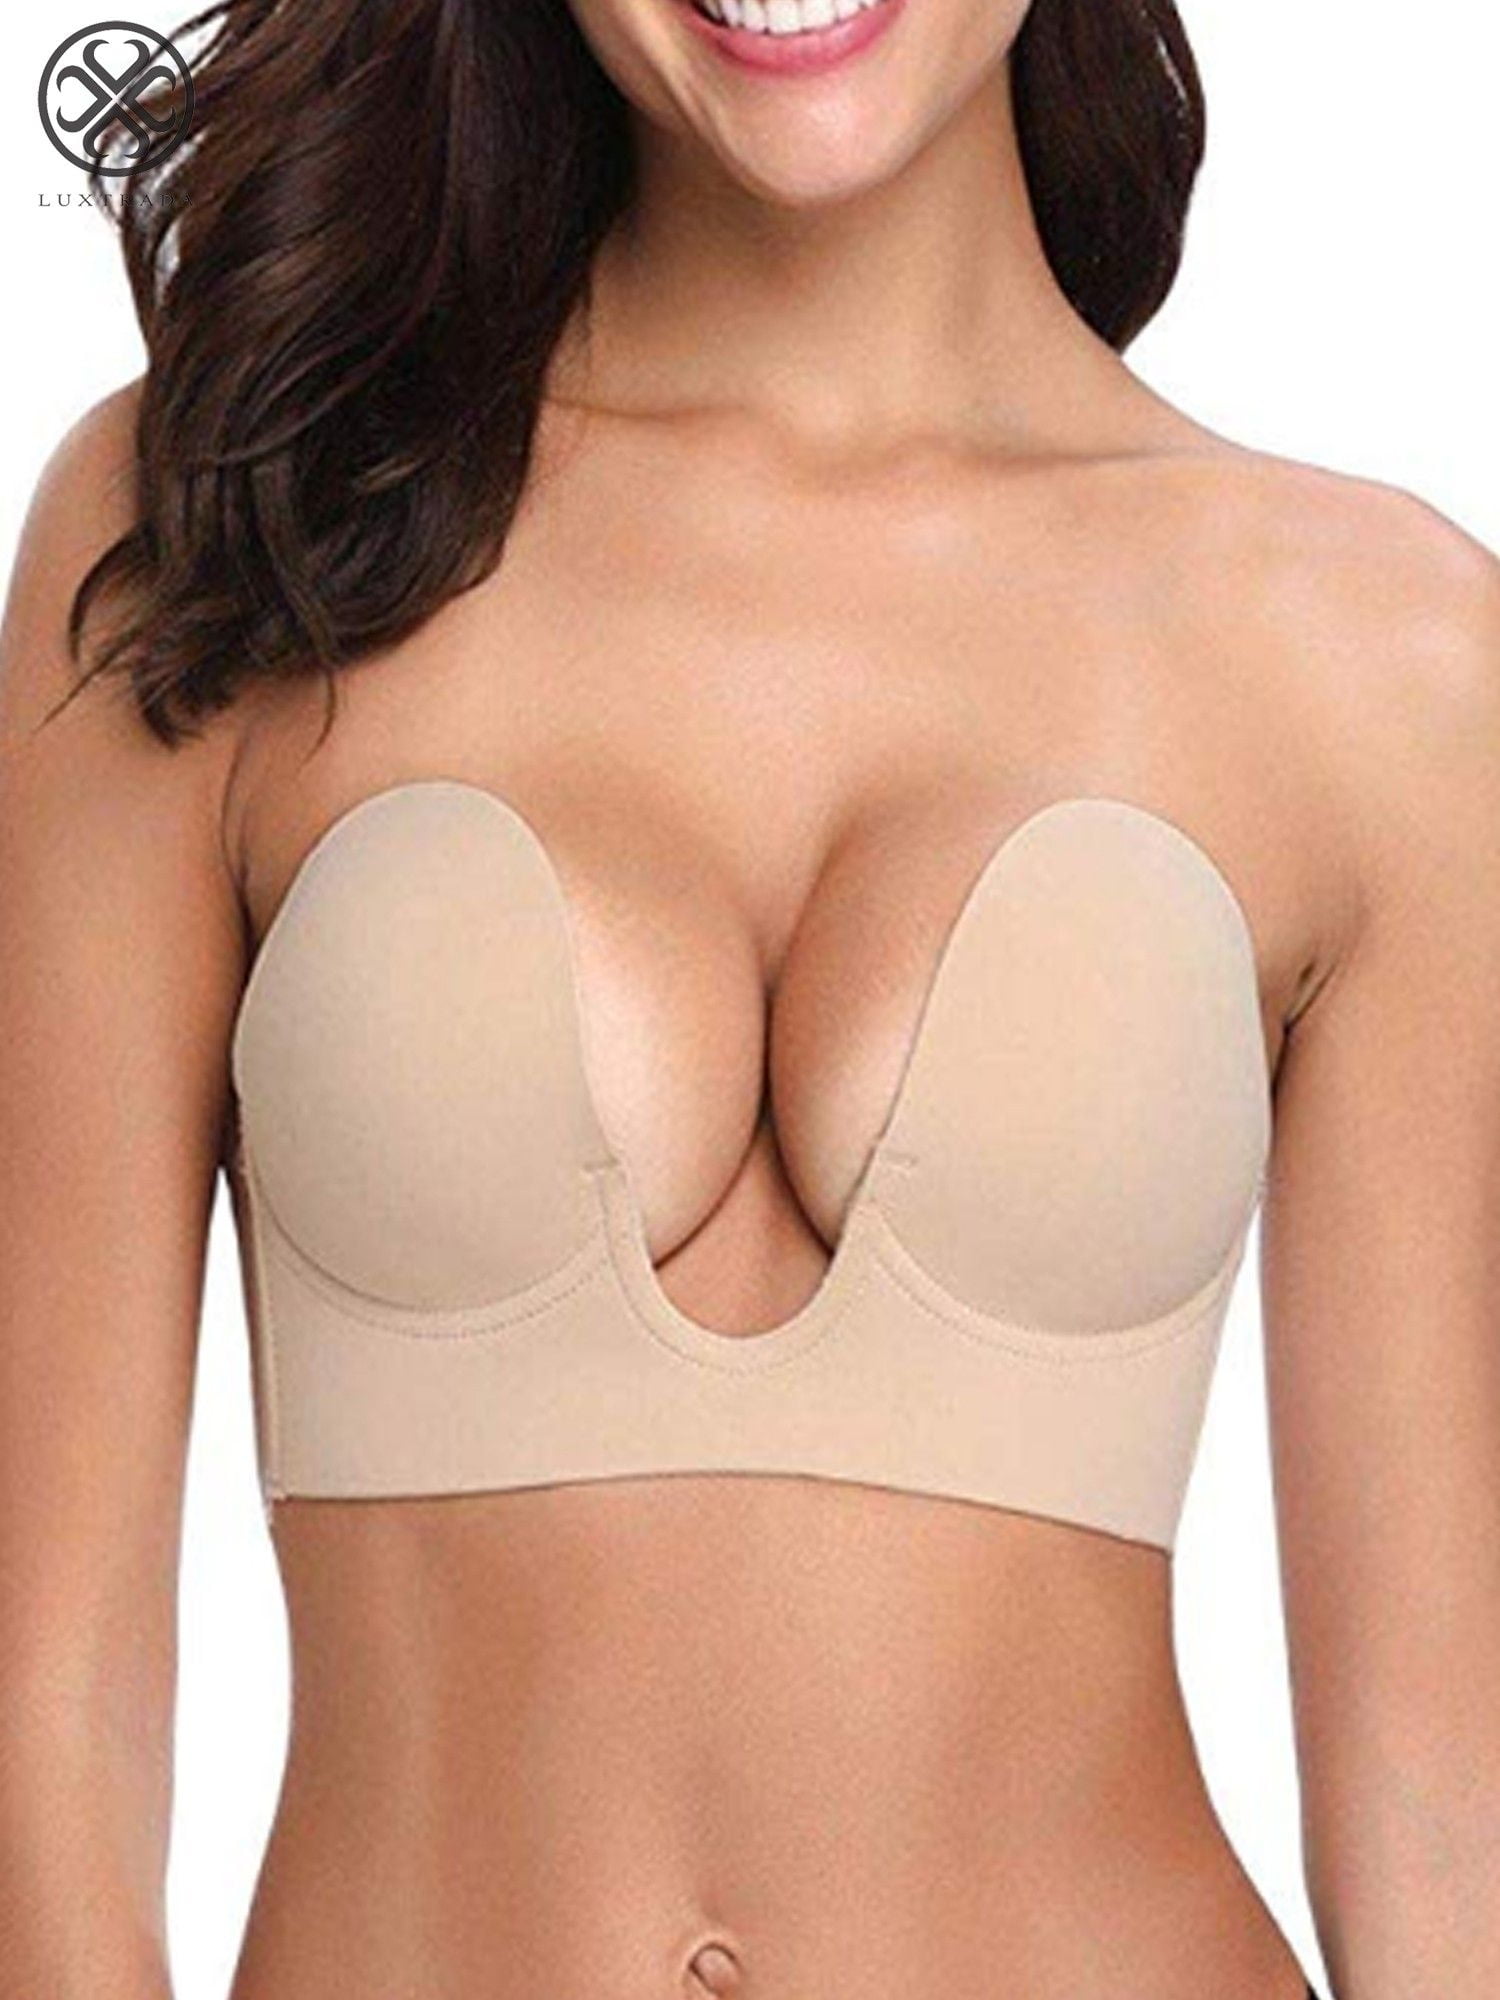 Luxtrada Strapless Self Adhesive Bra, Push Up Invisible Silicone Bras for  Women with Drawstring Suit For Dress Wedding PartySkin,Cup D